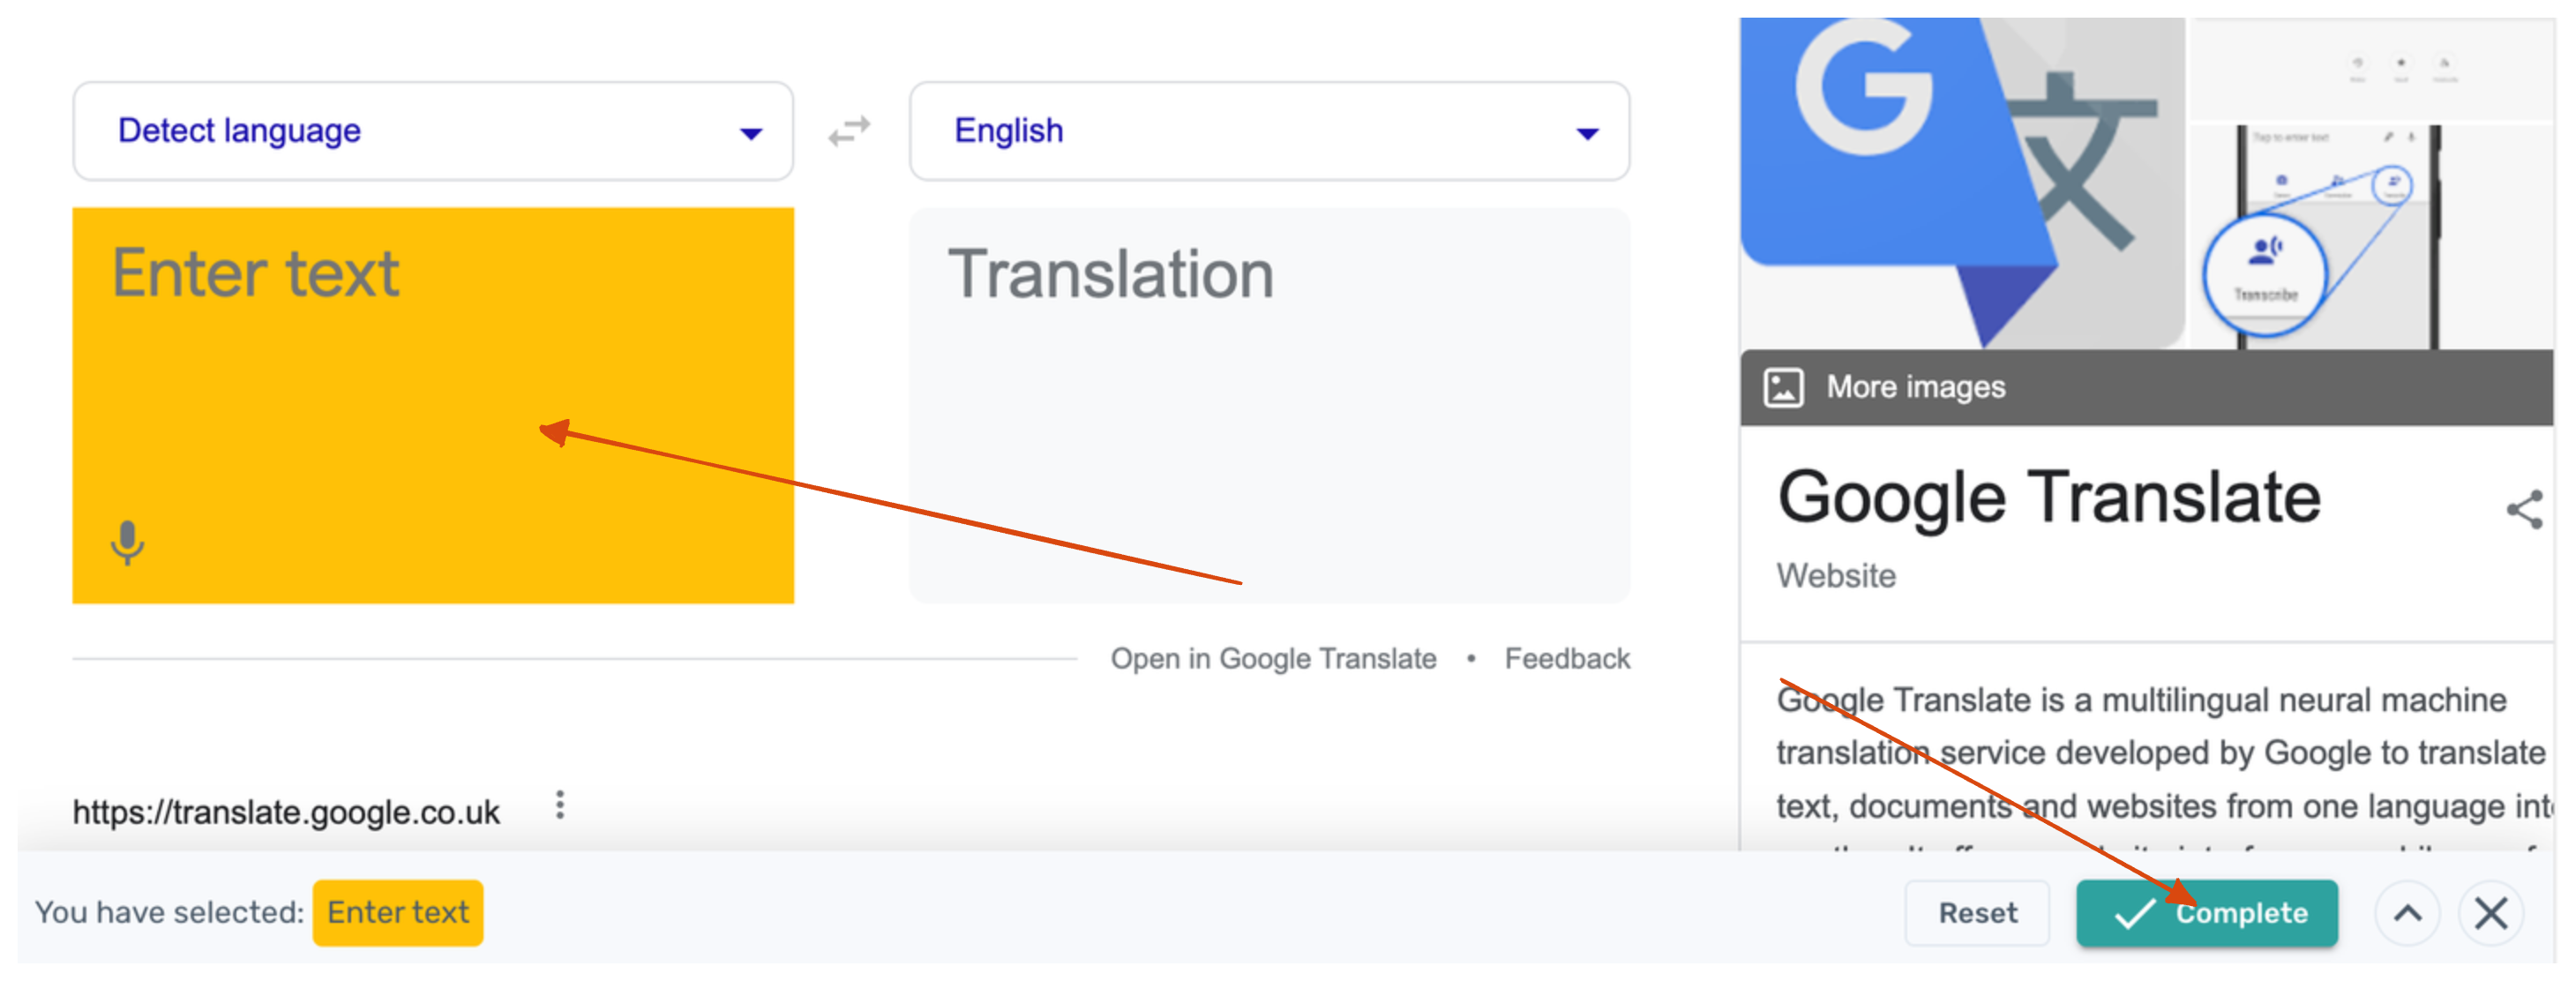 Enter the text to be tranlated into Google Translate